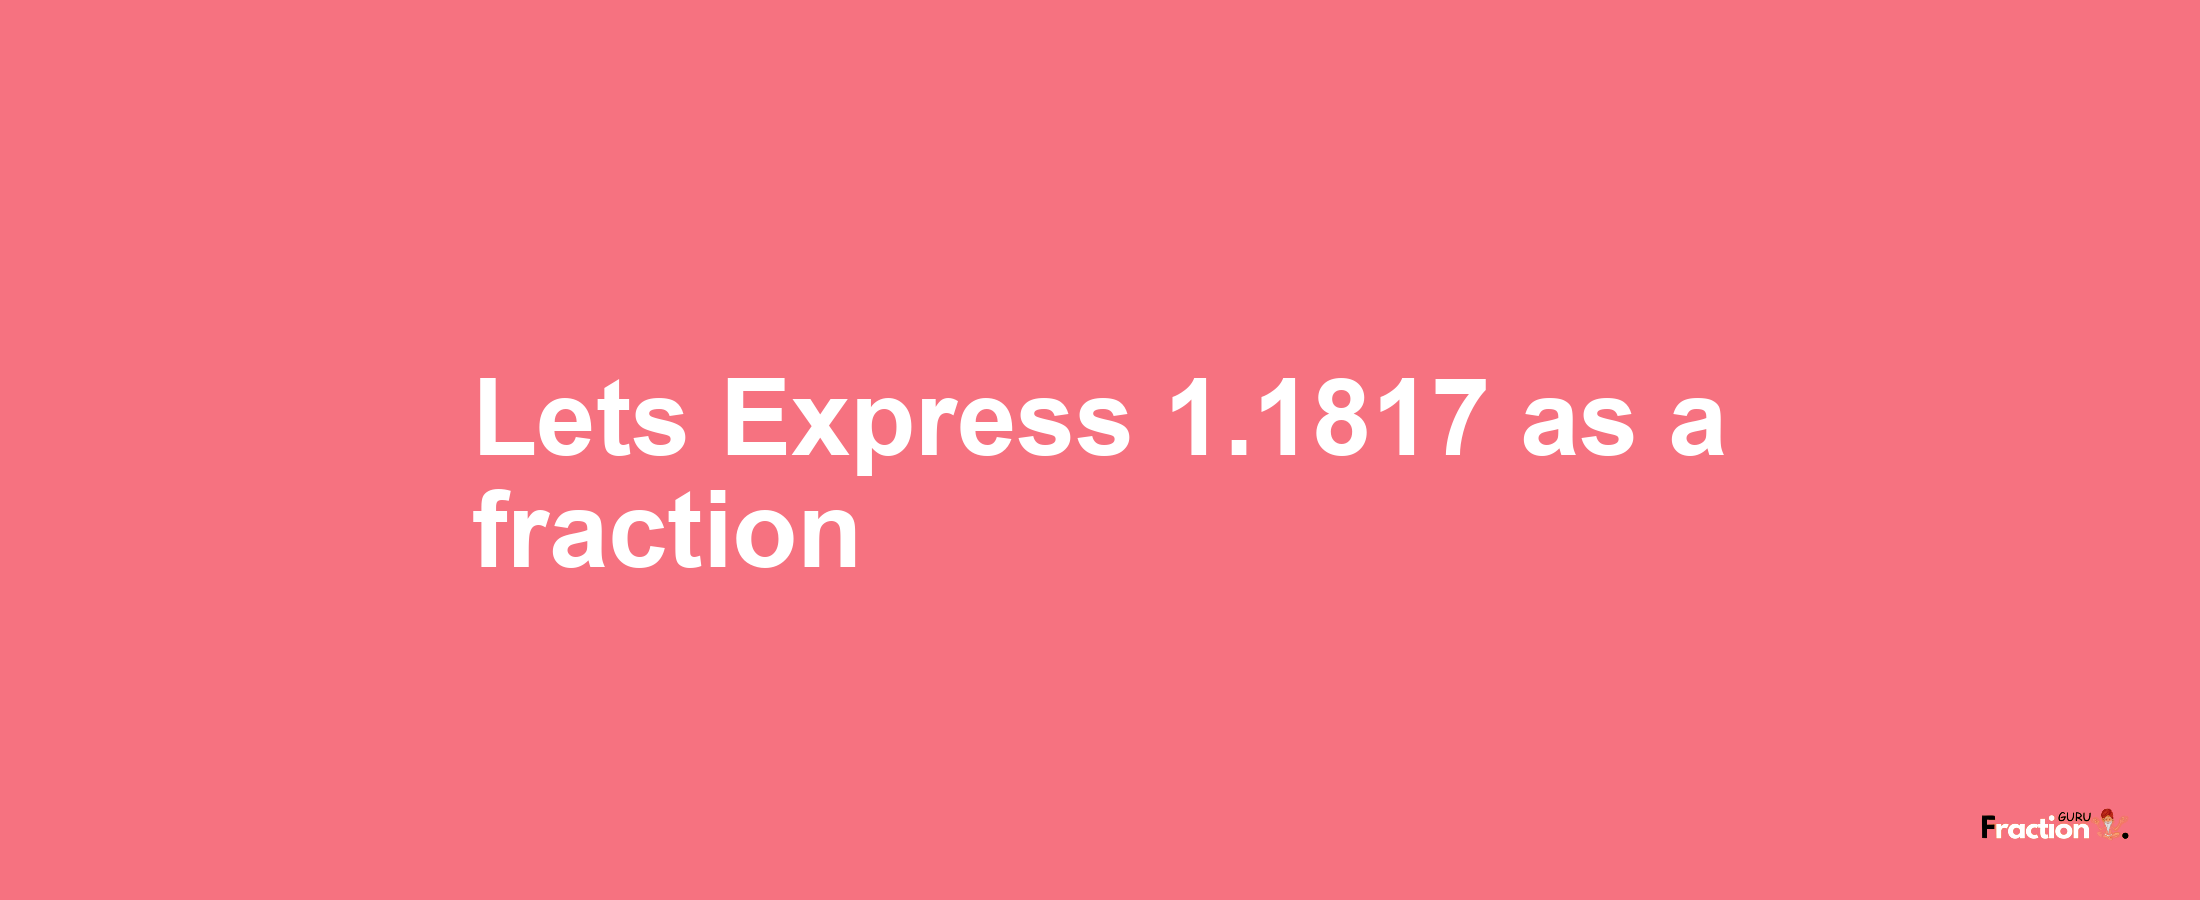 Lets Express 1.1817 as afraction